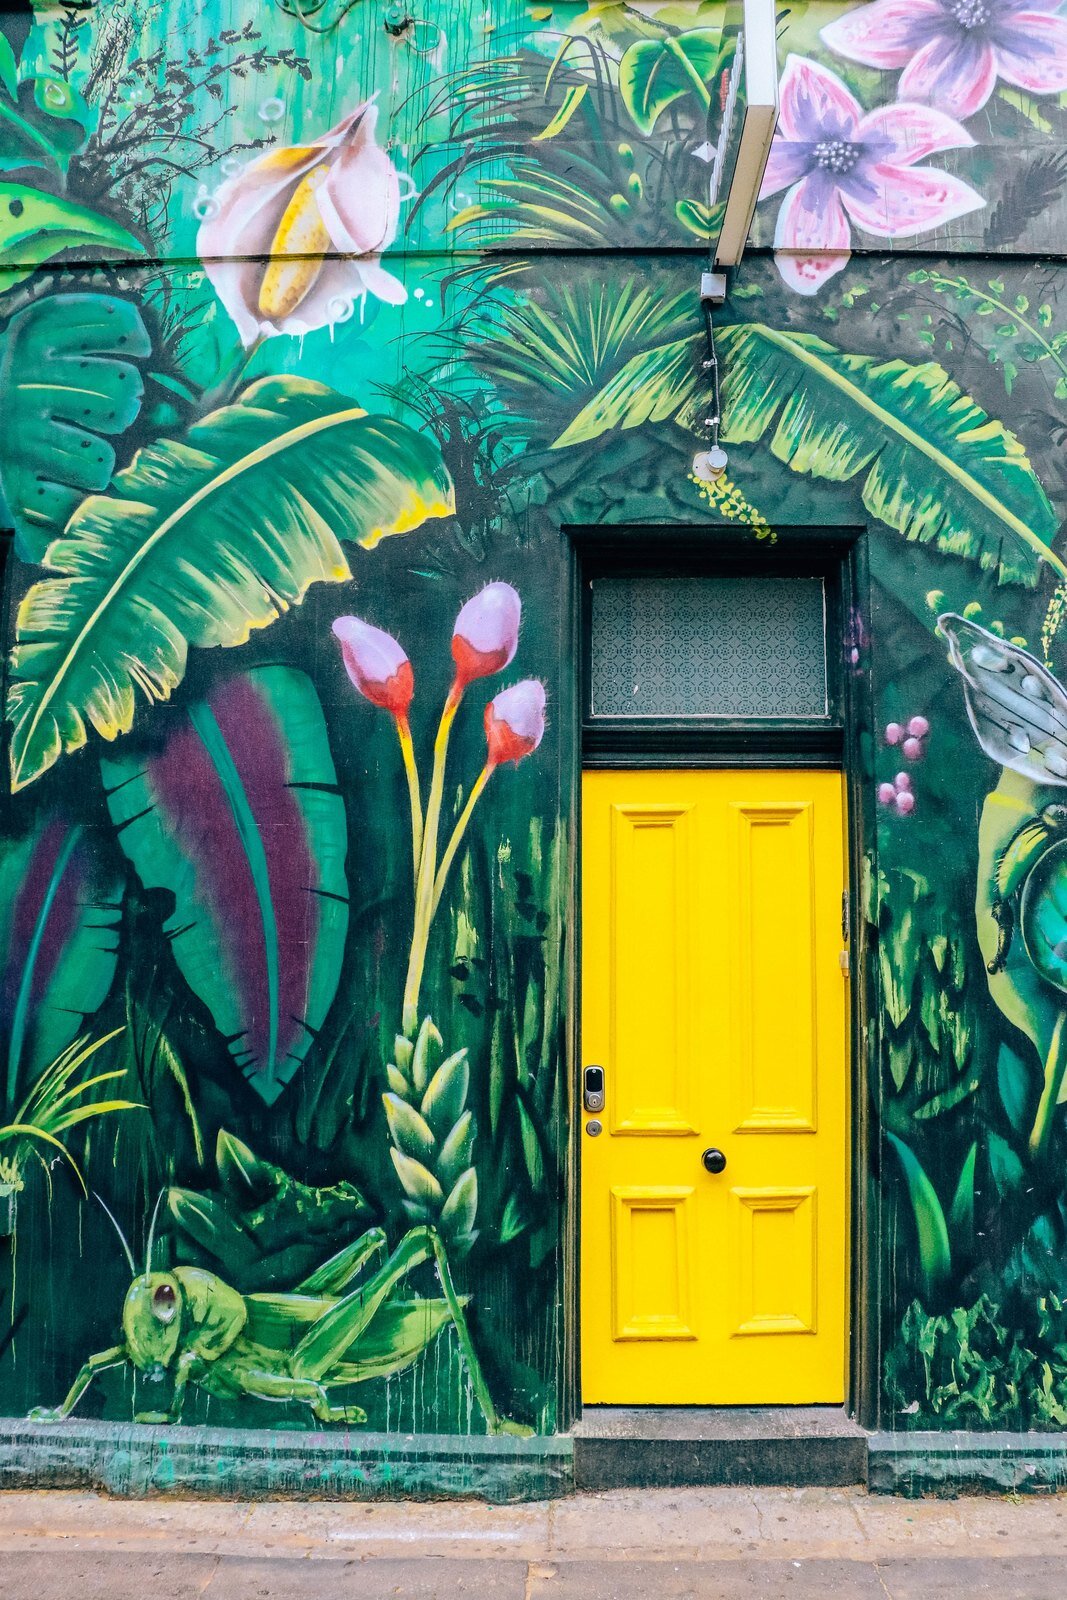 colourful Melbourne street art with yellow doorway